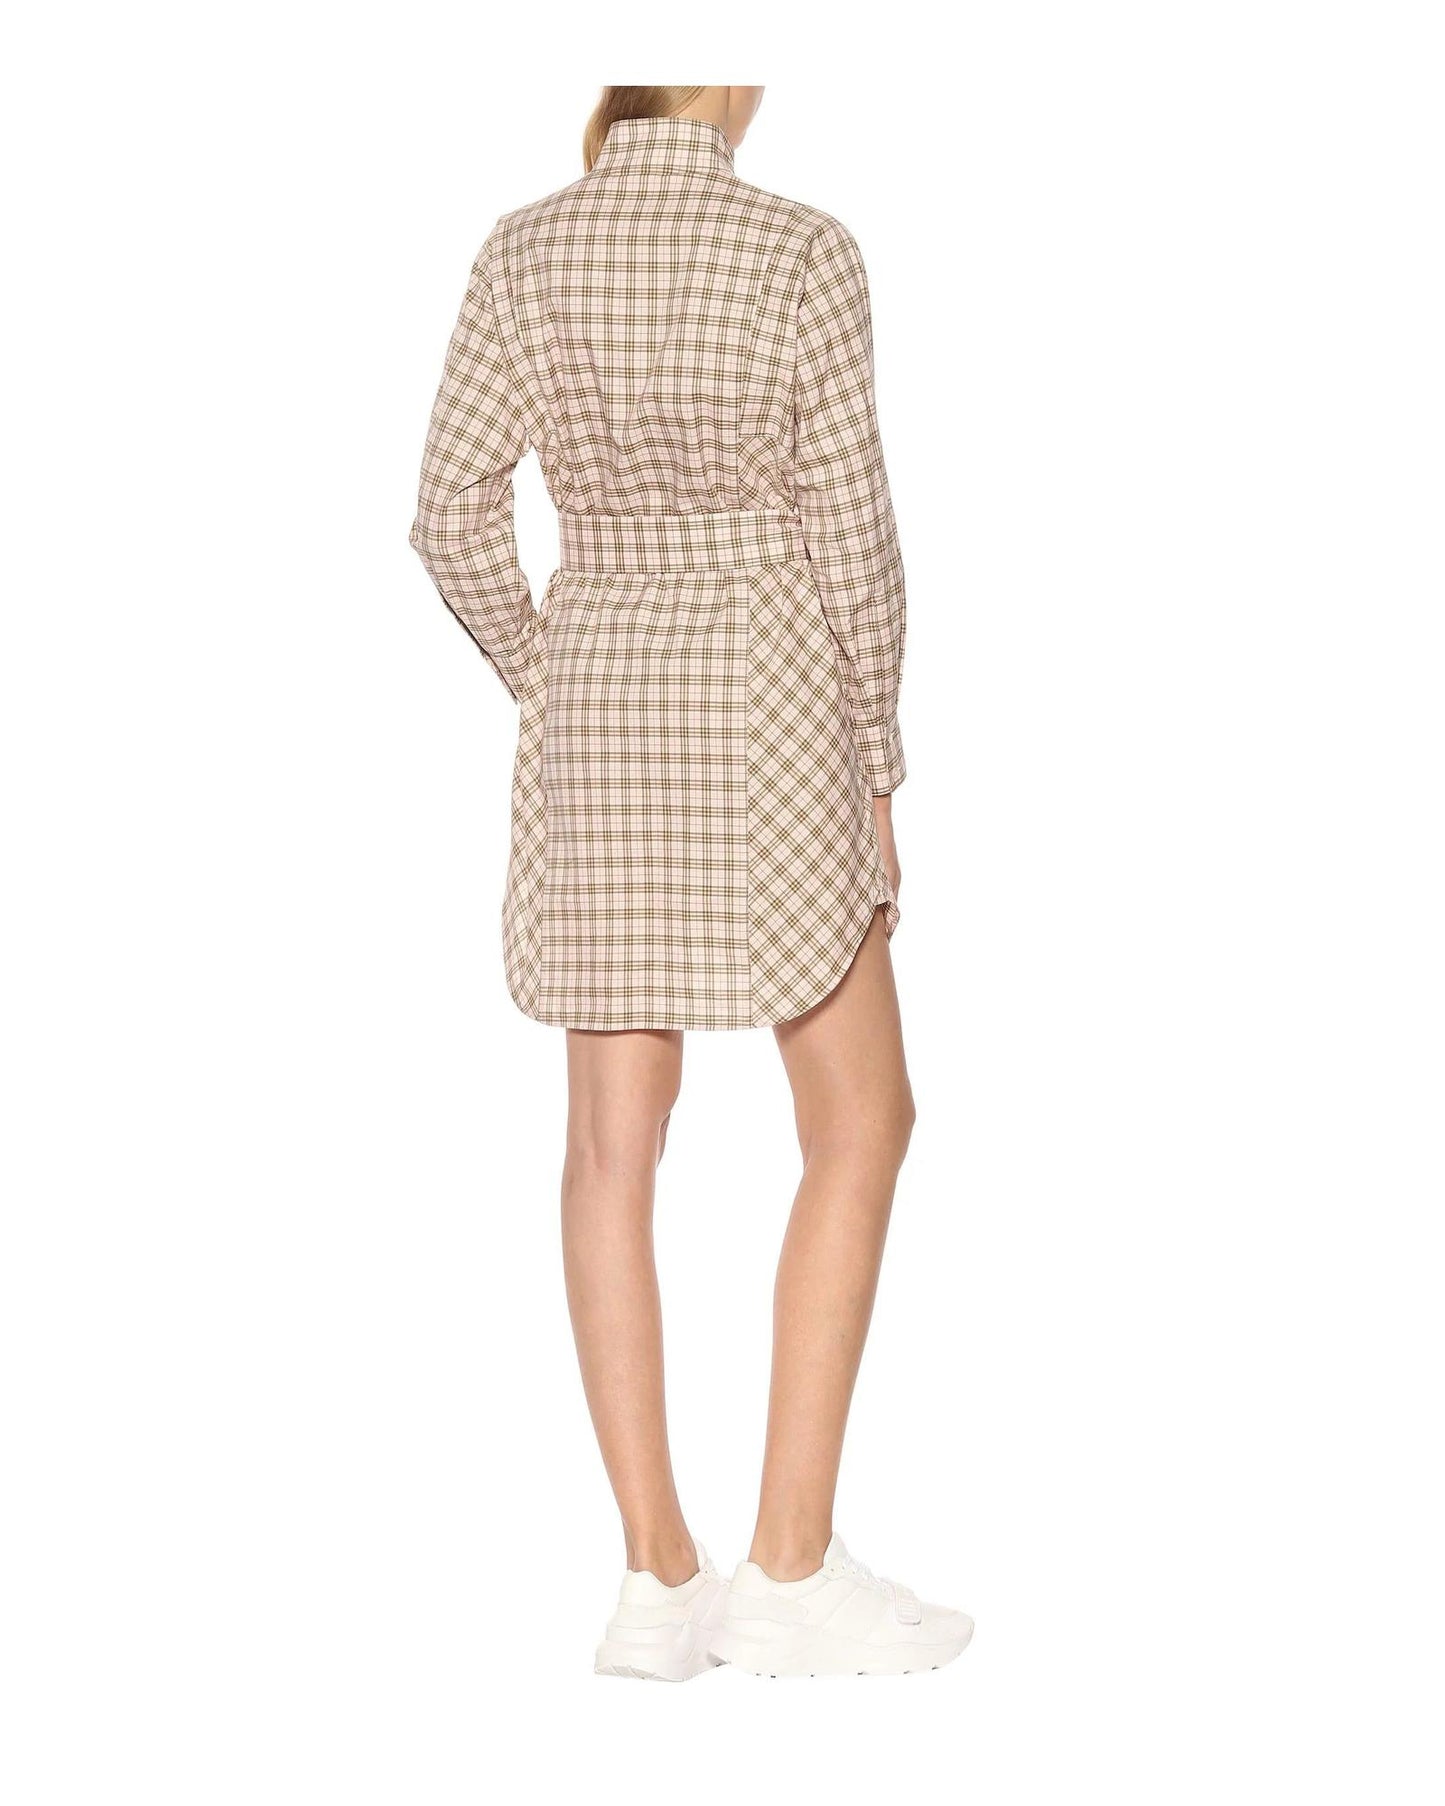 Iconic Check Cotton Shirt Dress with Long Sleeves and Belt 40 IT Women